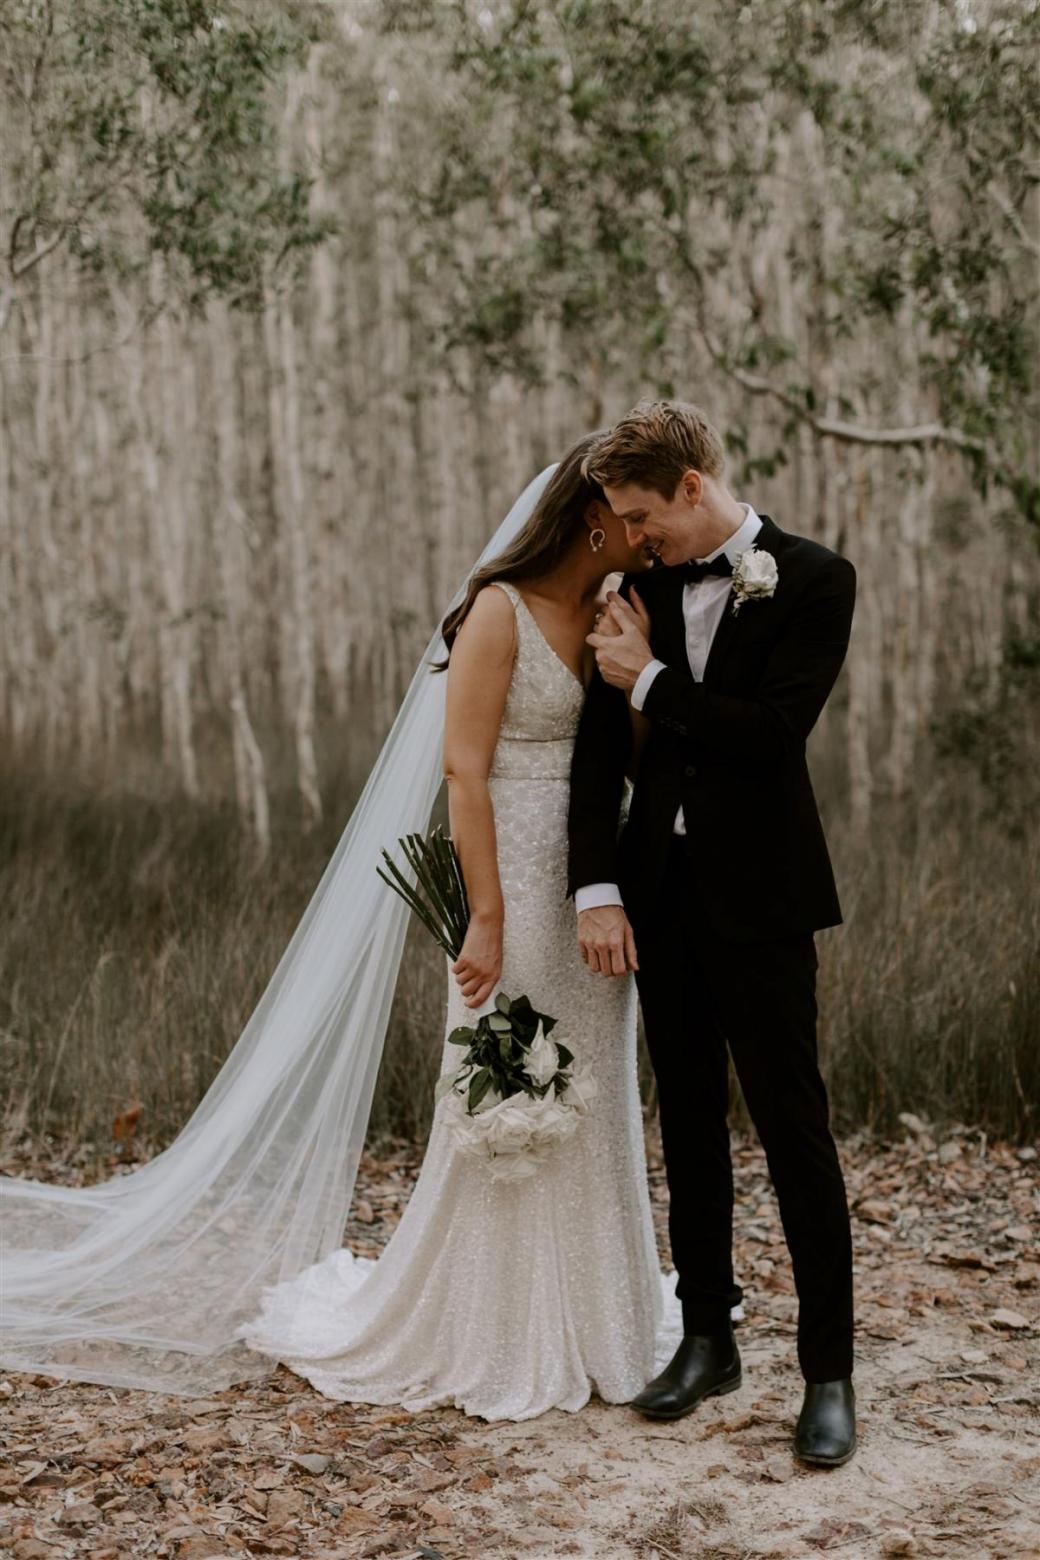 KWH bride Jemma and Sam; Jemma wears the GEORGINA gown by Karen Willis Holmes; a floral beaded Luxe wedding dress with a V-neck and bias cut skirt